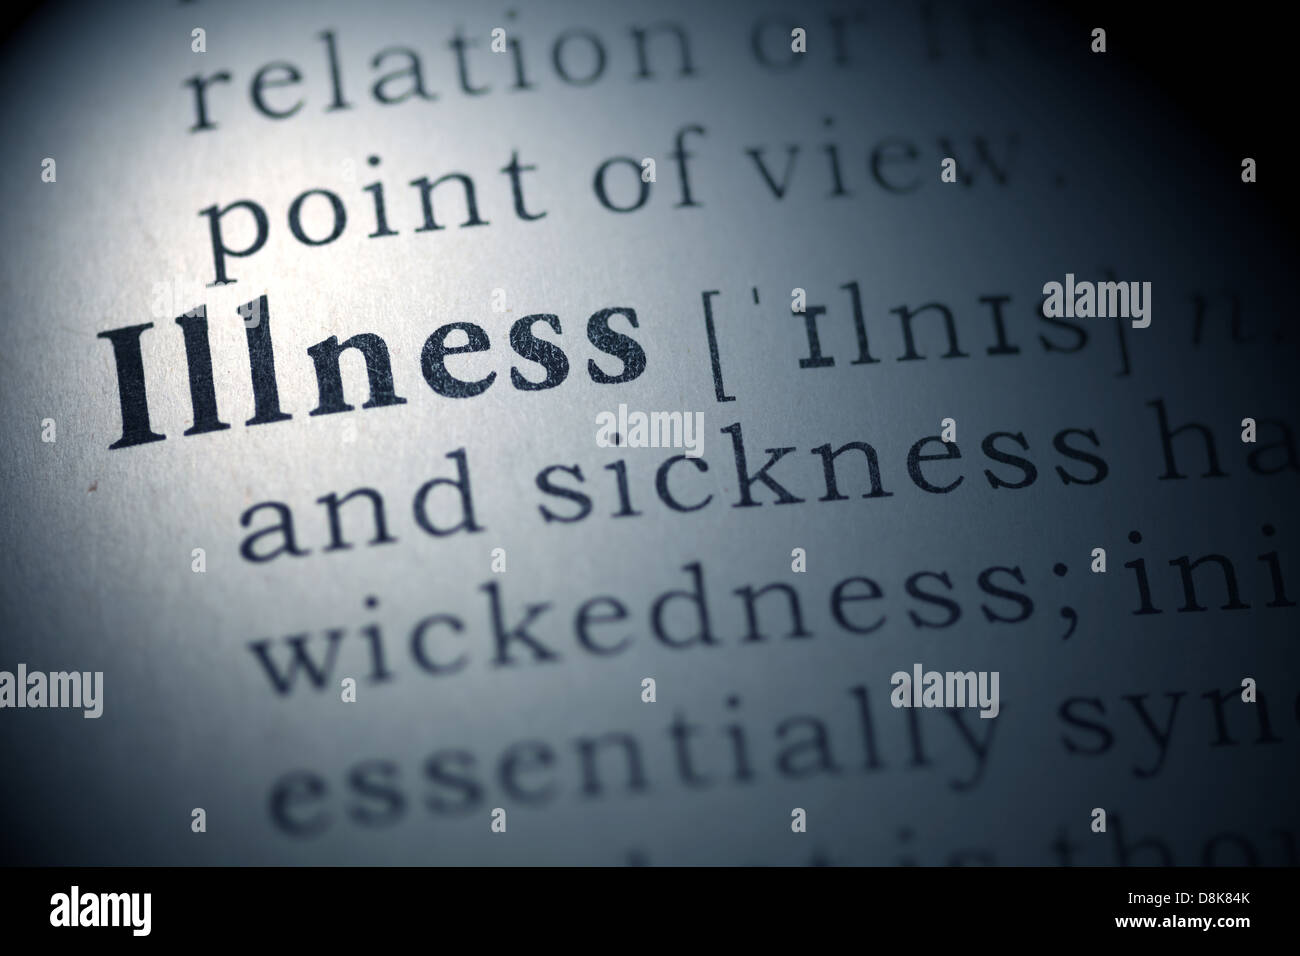 Dictionary definition of the word Illness. Stock Photo